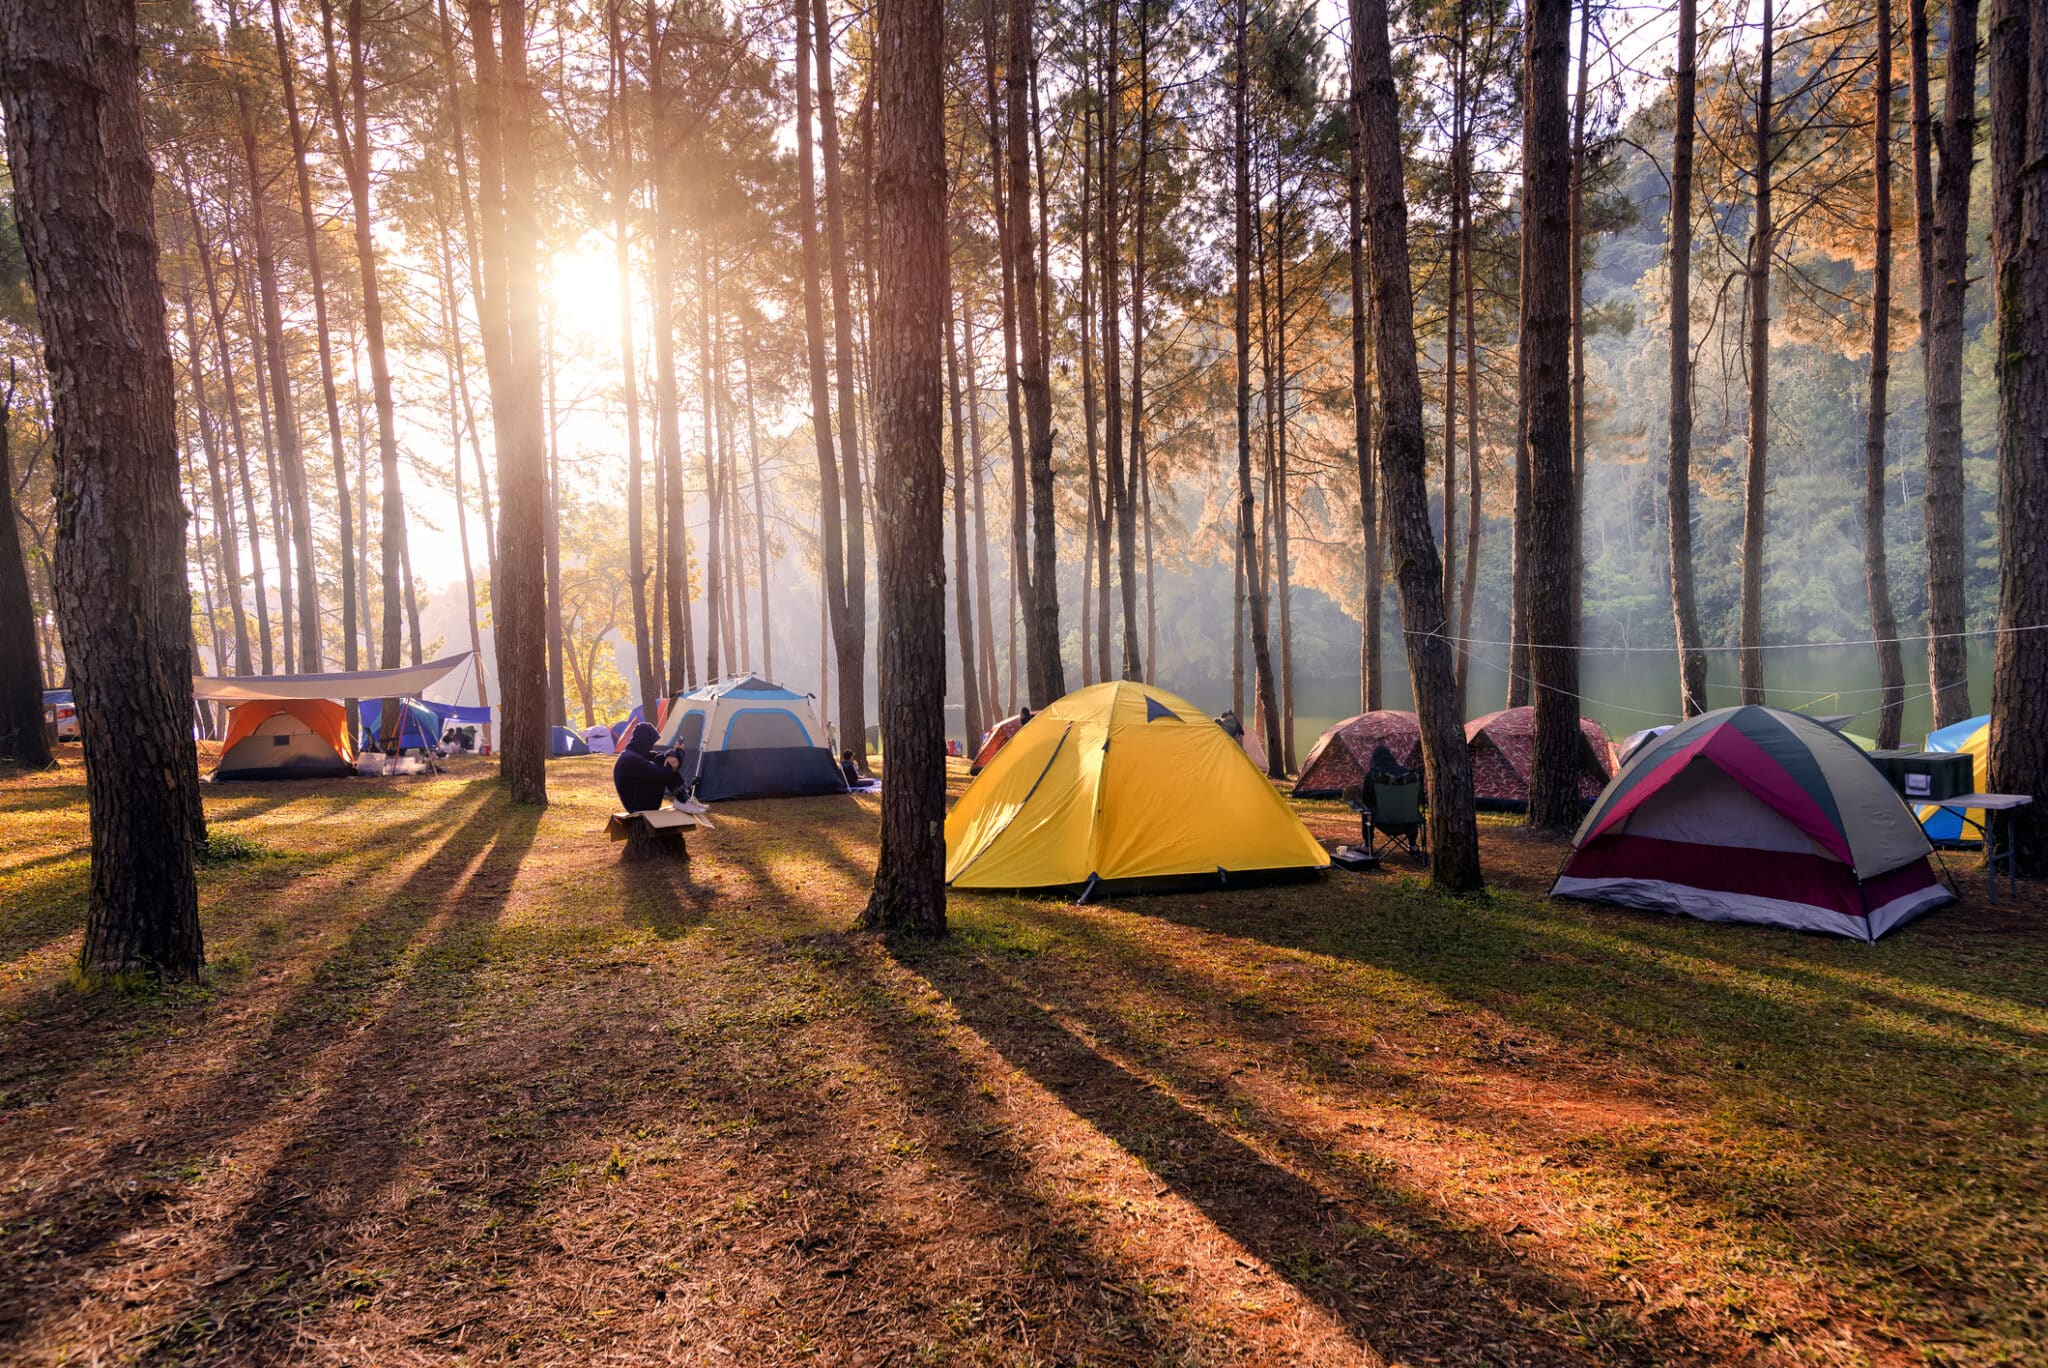 Camping and tent under the pine forest in sunset at Pang-ung, pine forest park